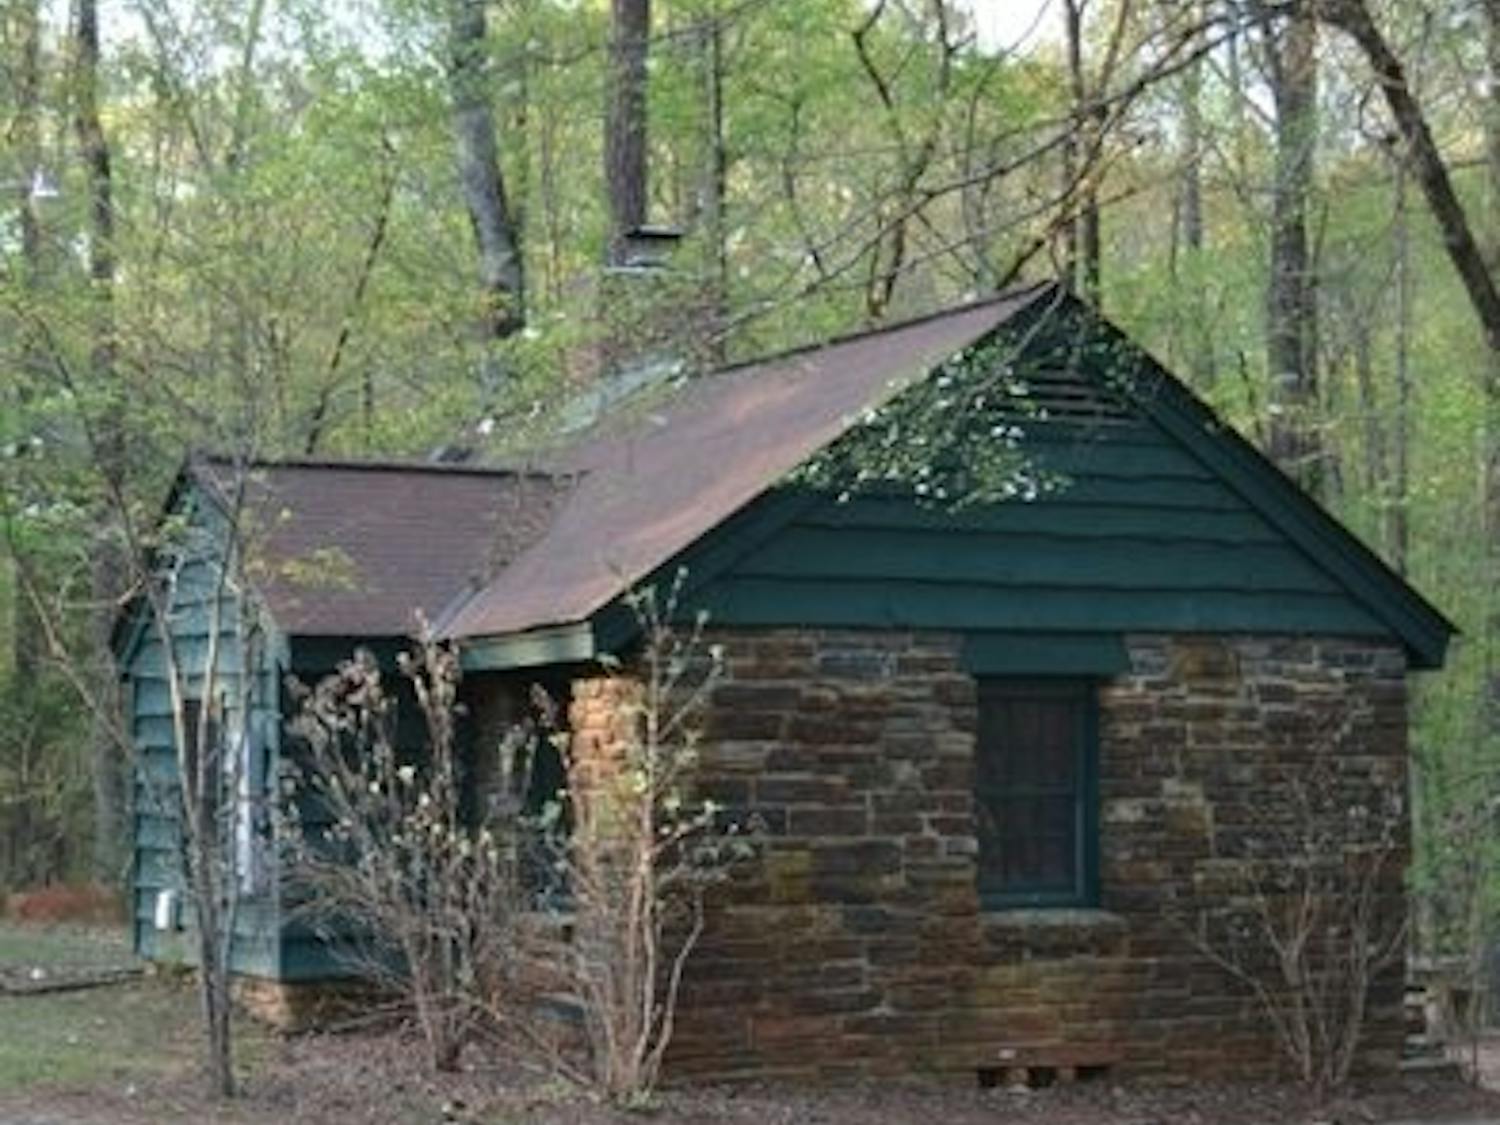 On its 696 acres, Chewacla State Park features many of the original structures, like this cabin, which was built in the 1930s. (FILE PHOTO)